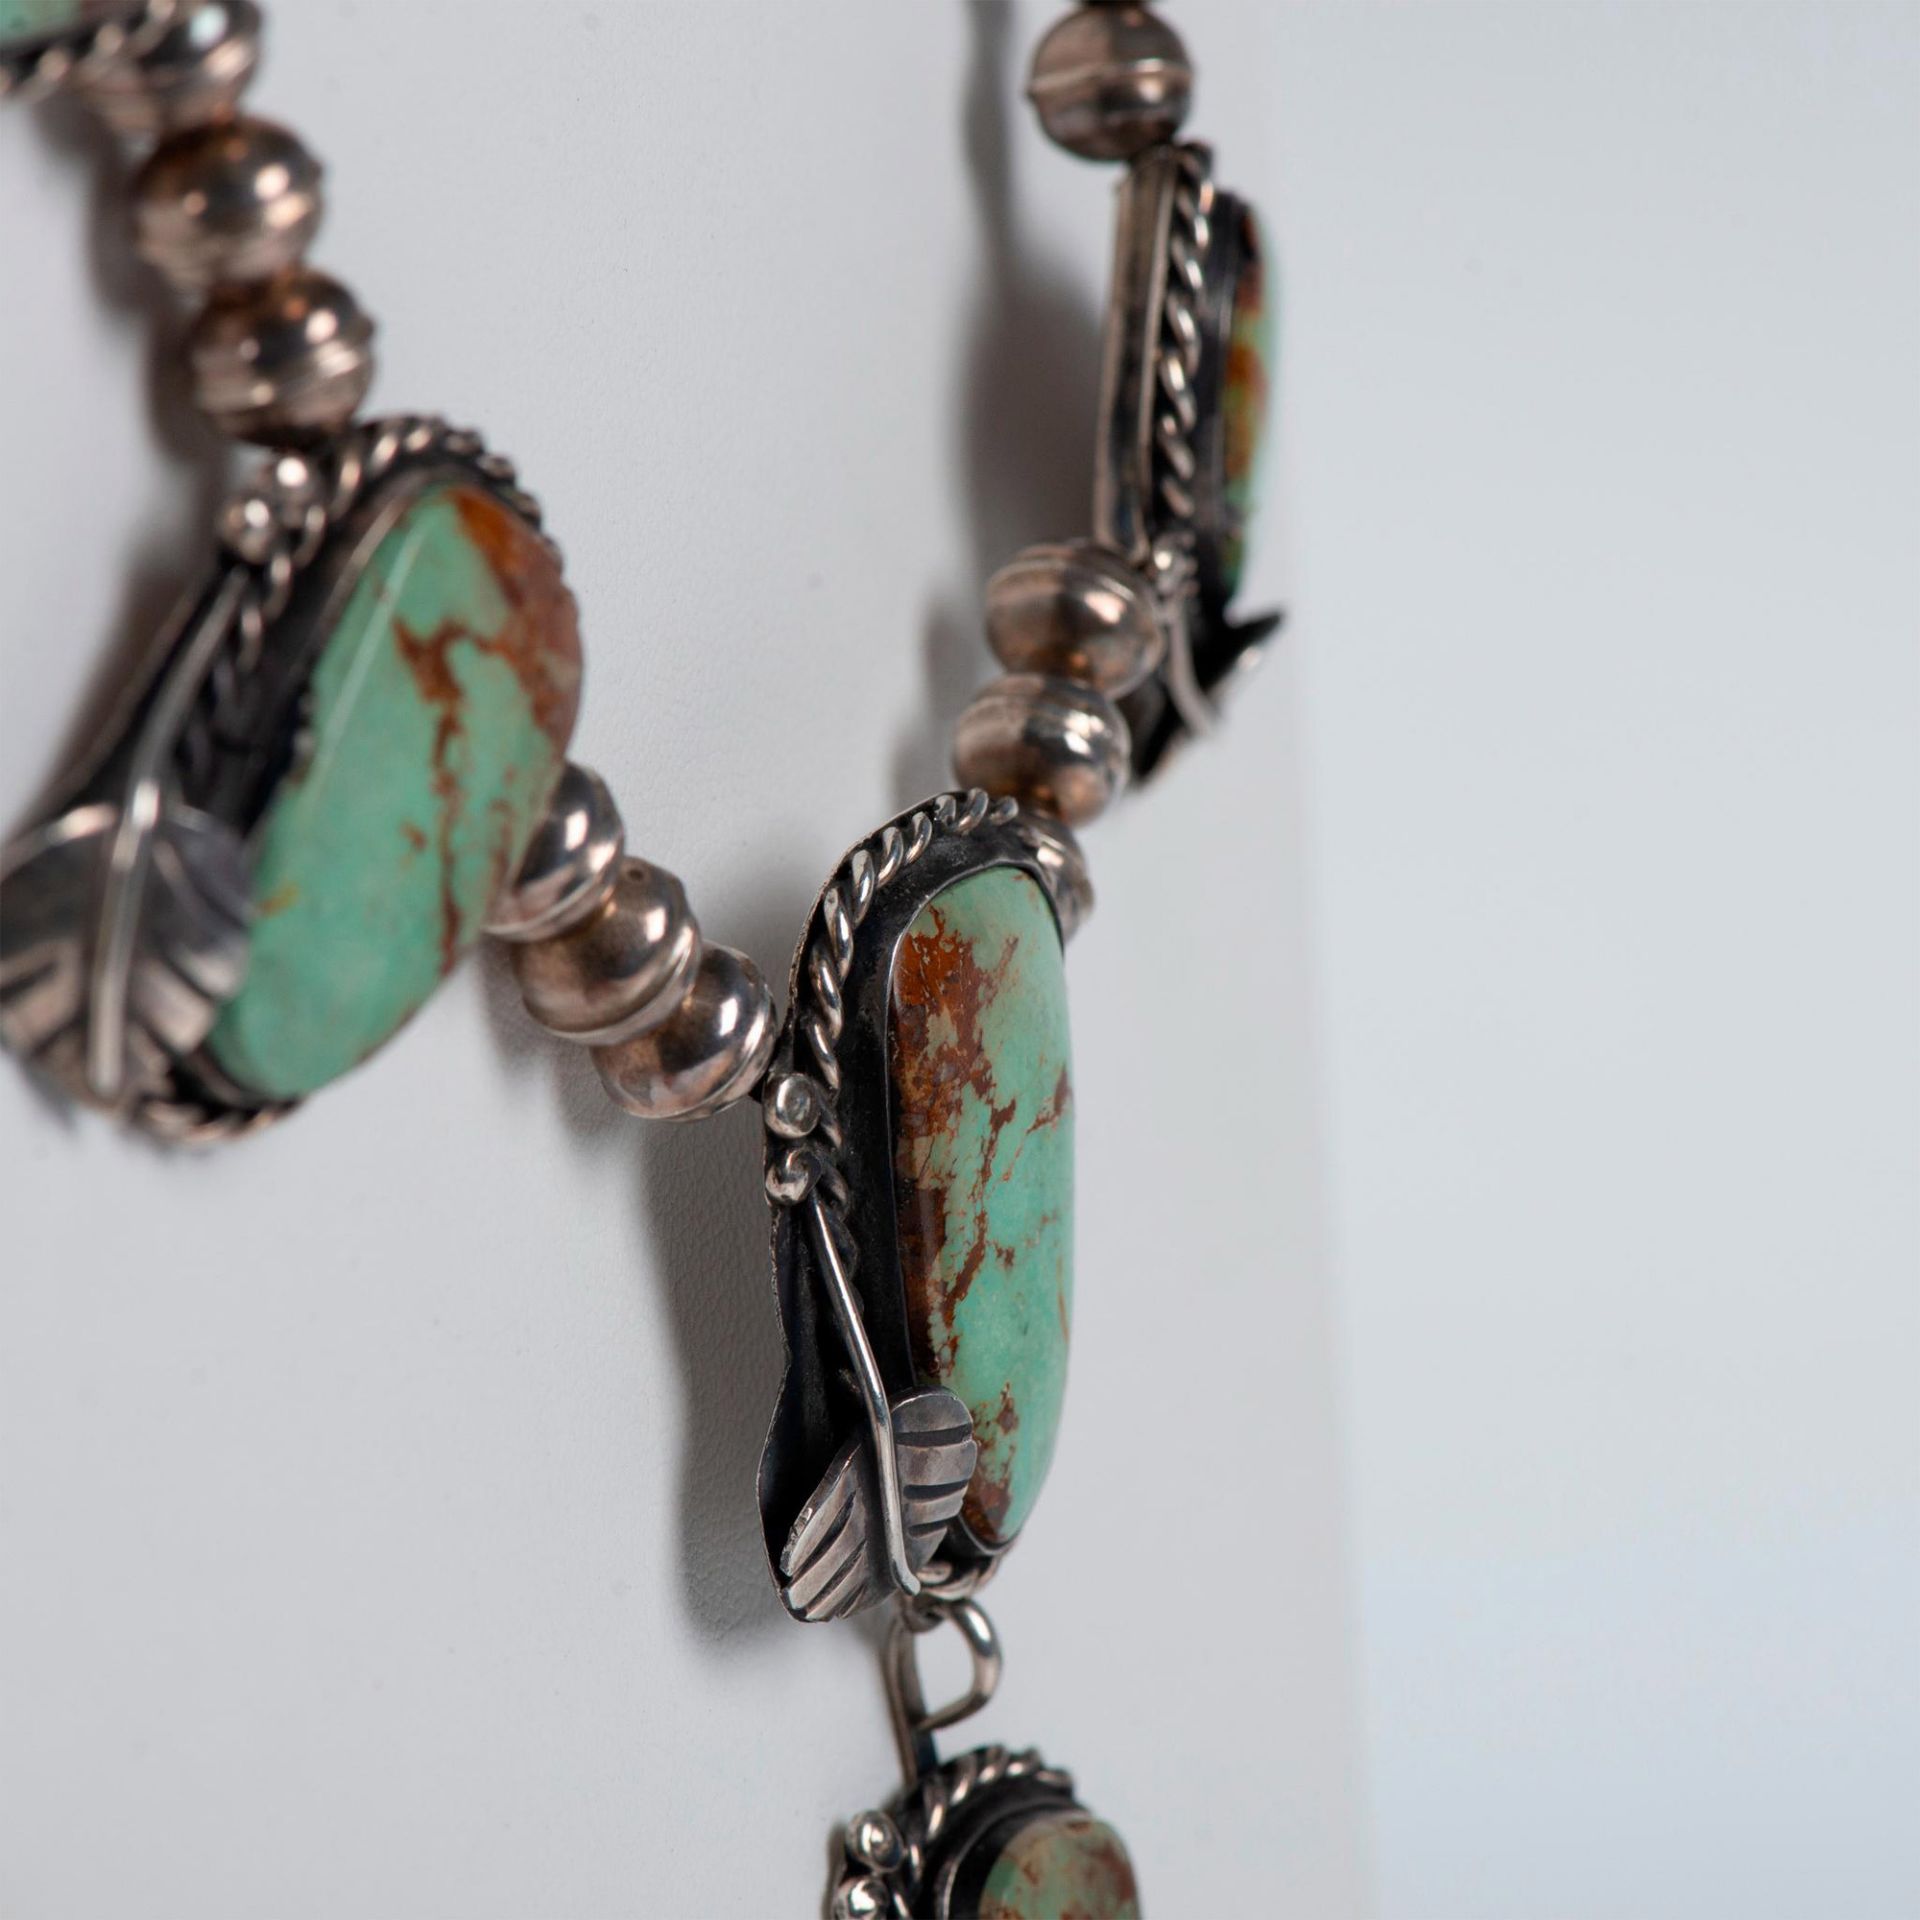 2pc Navajo Sterling Silver and Turquoise Necklace & Ring - Image 3 of 7